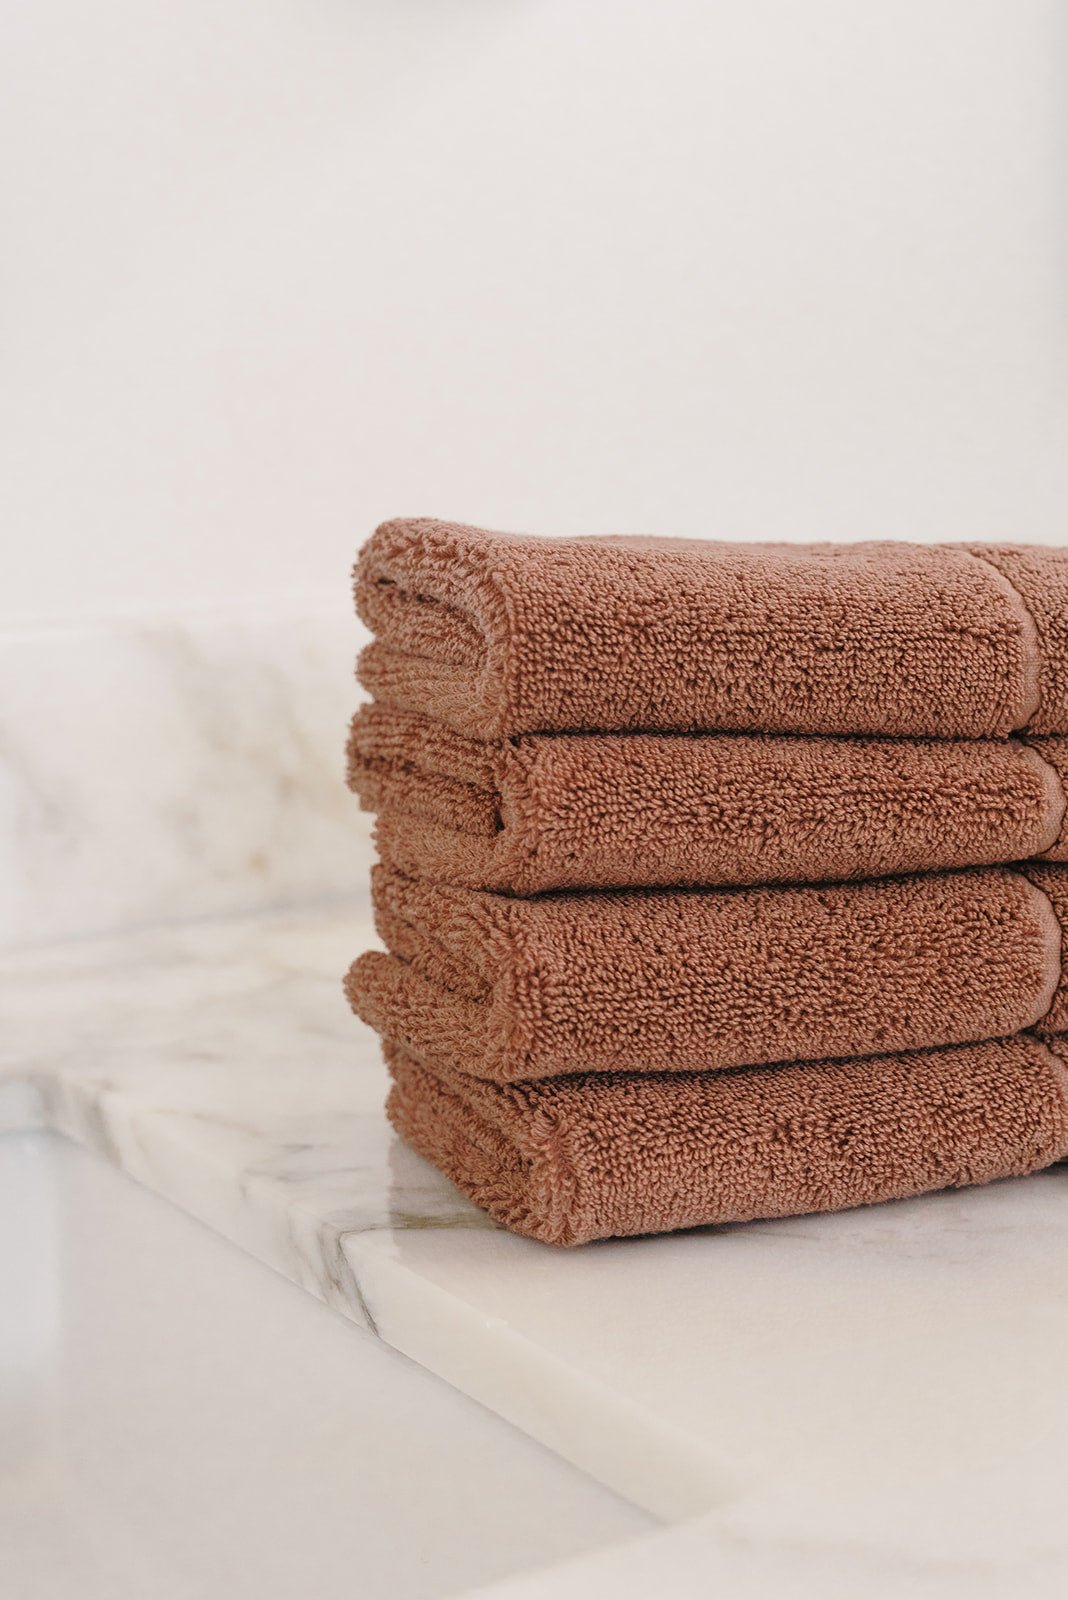 Charcoal Premium Plush Wash Cloths. Photo of Premium Plush Wash Cloths taken with in a white bathroom with marble counter tops. 